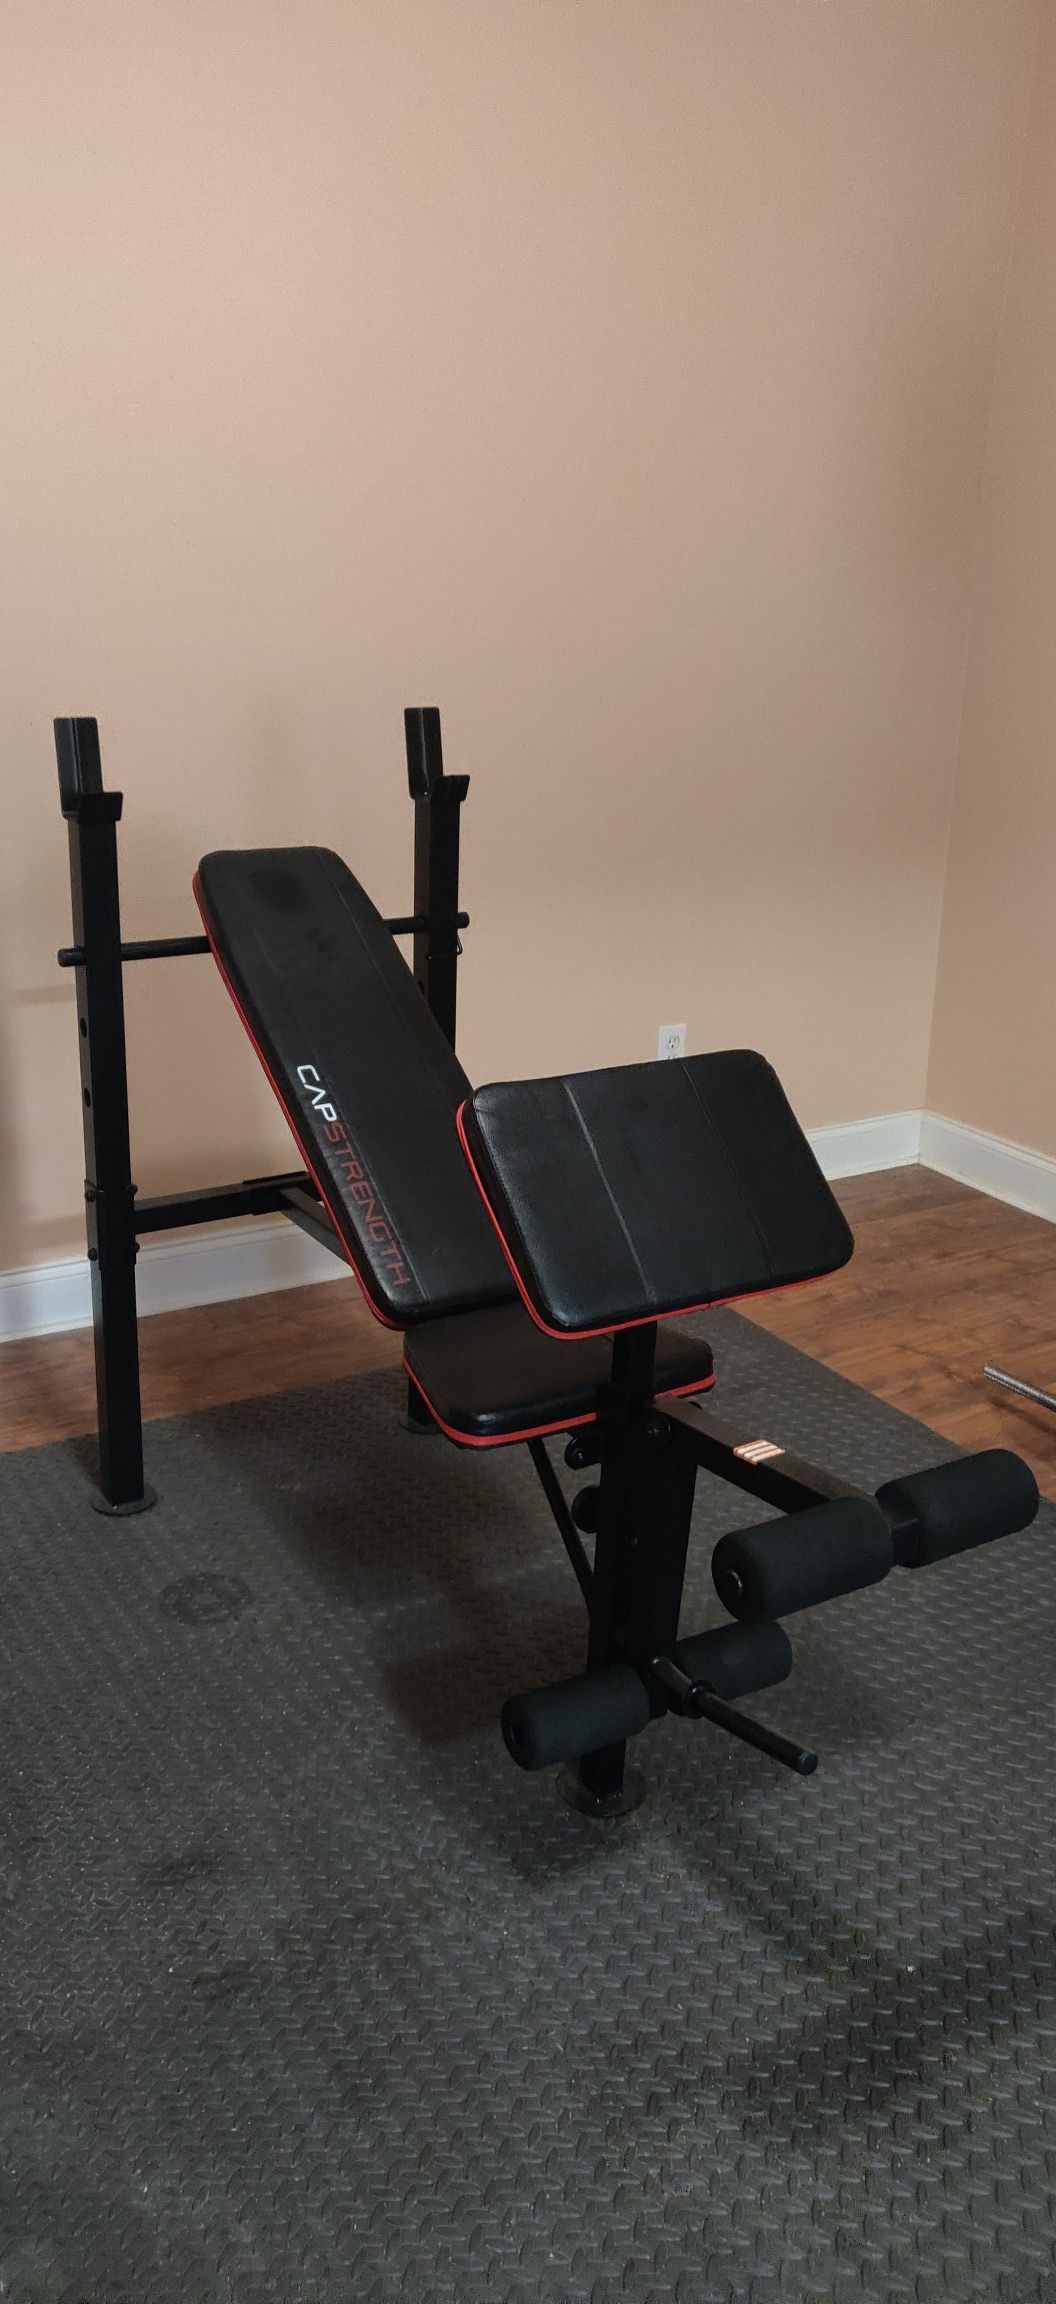 CAP Strength incline weight bench with "Leg Extension" and "Preacher Curl"